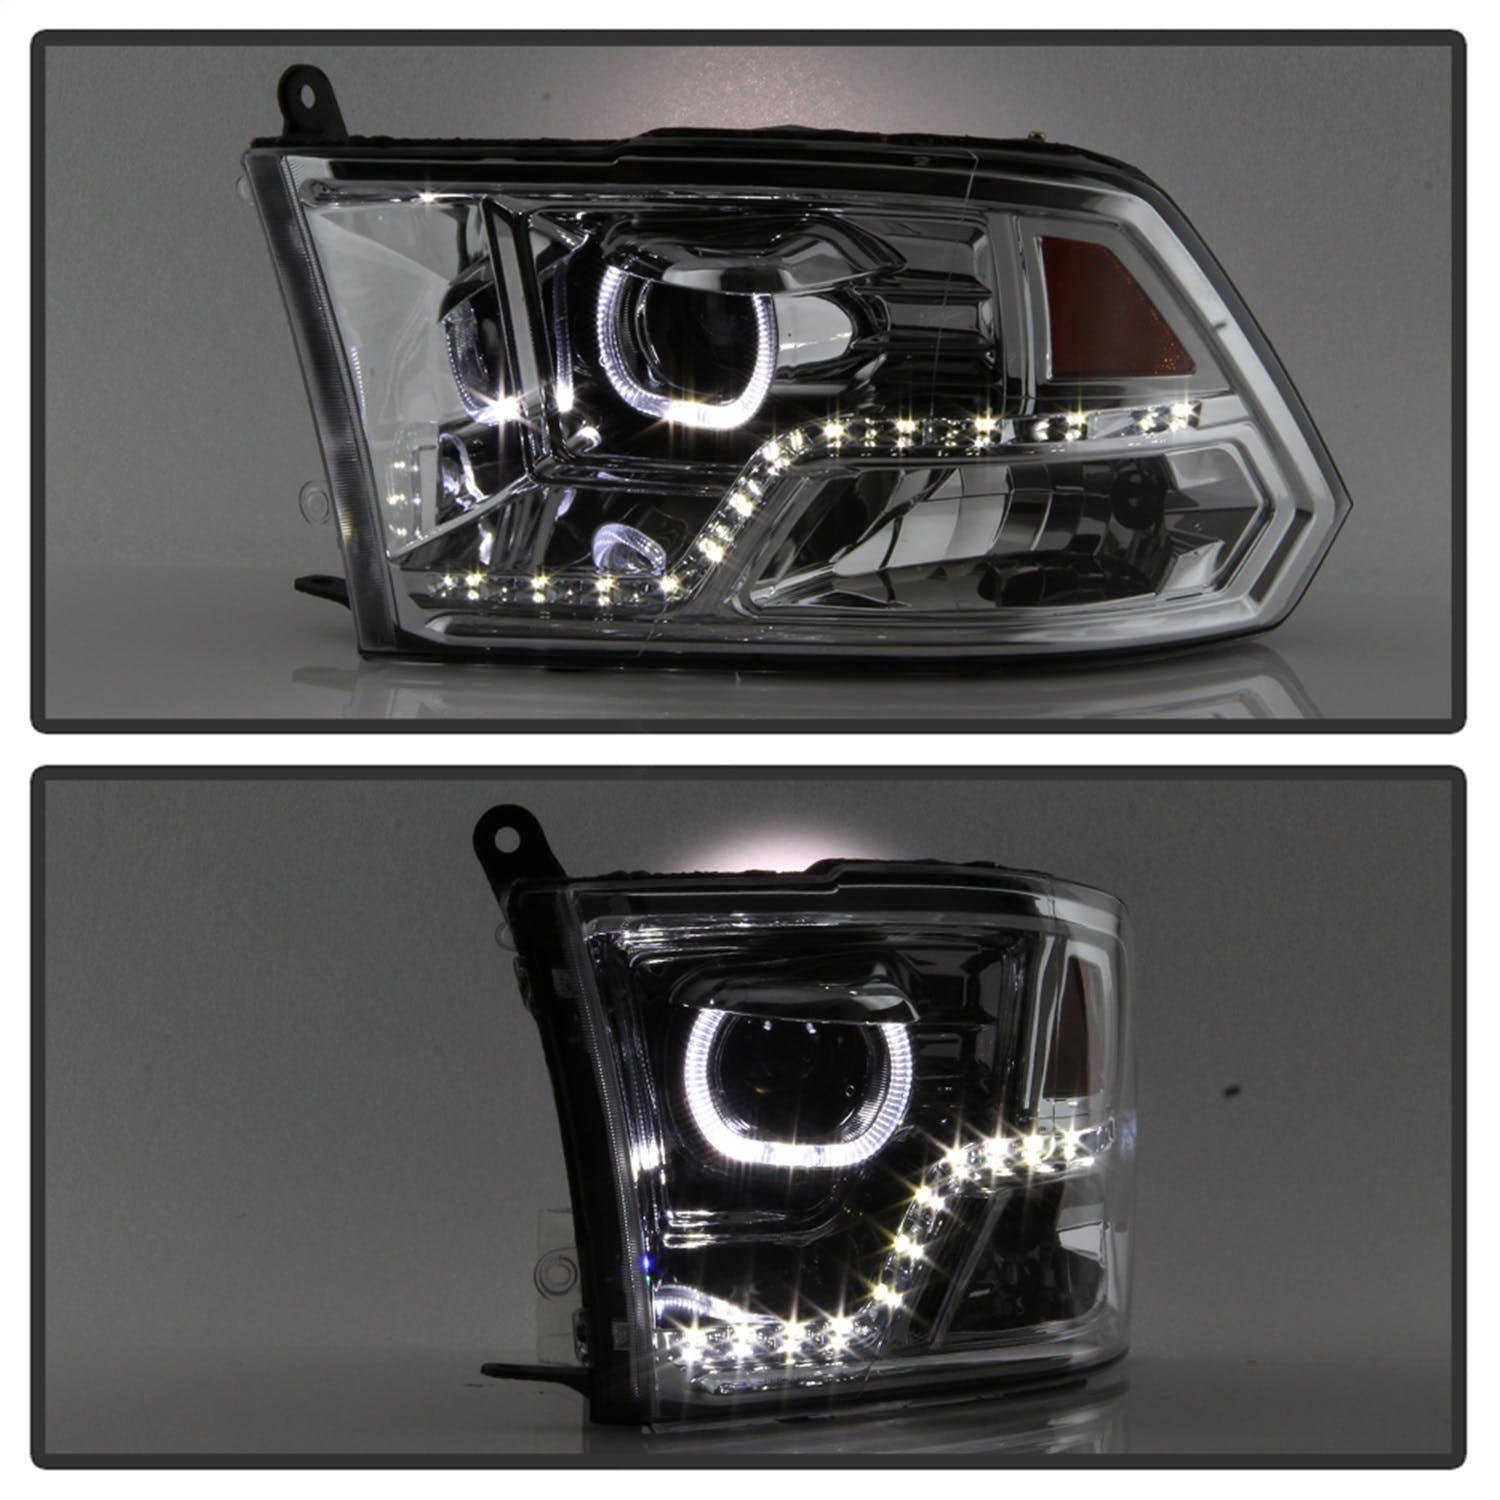 XTUNE POWER 9036743 Dodge Ram 1500 09 18 Ram 2500 3500 10 19 Projector Headlights Halogen Model Only ( Not Compatible With Factory Projector And LED DRL ) LED Halo Low Beam H9(Included) ; High Beam H9 ; Signal 3157(Not Included) Chrome